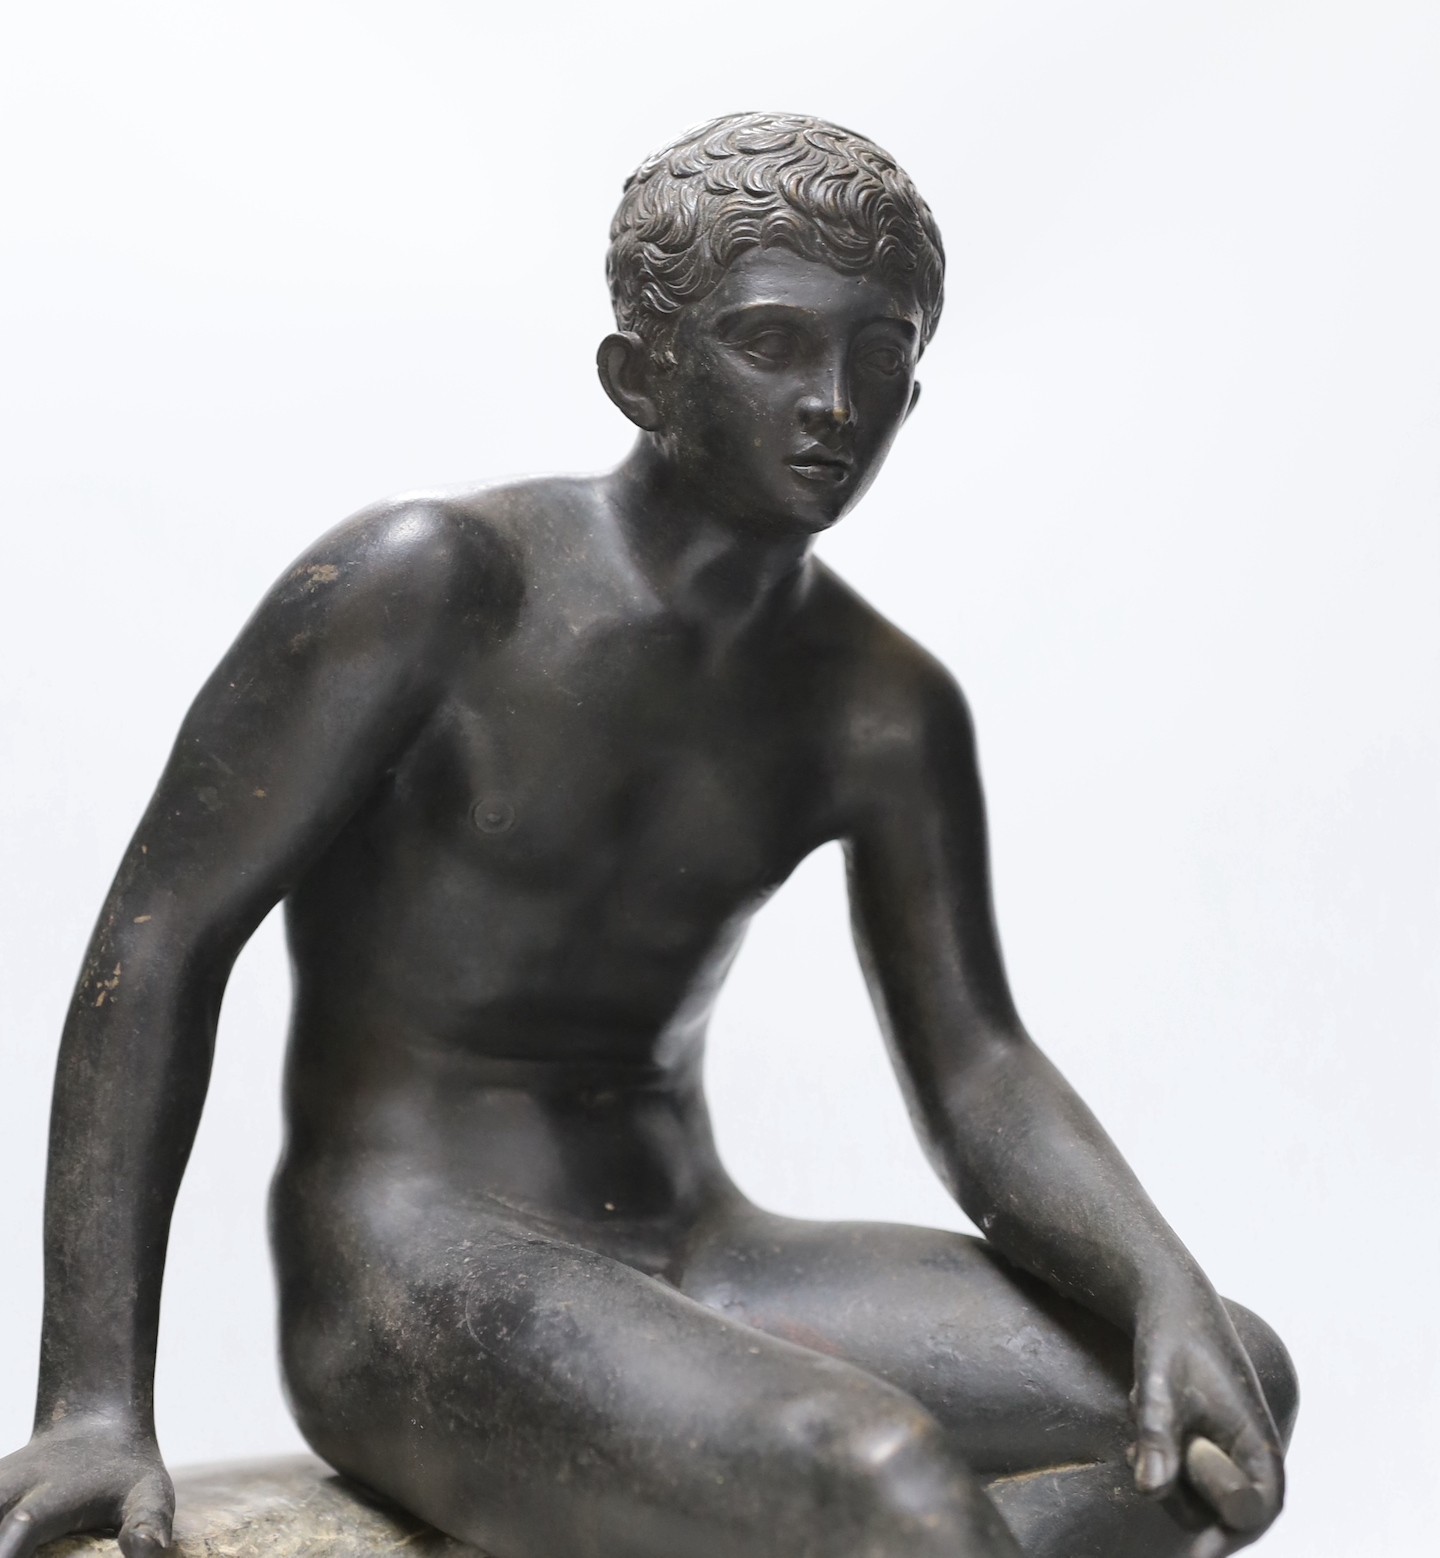 After the Antique, a late 19th century bronze figure of Mercury, seated on a grey marble naturalistic rocky base, 41cm high